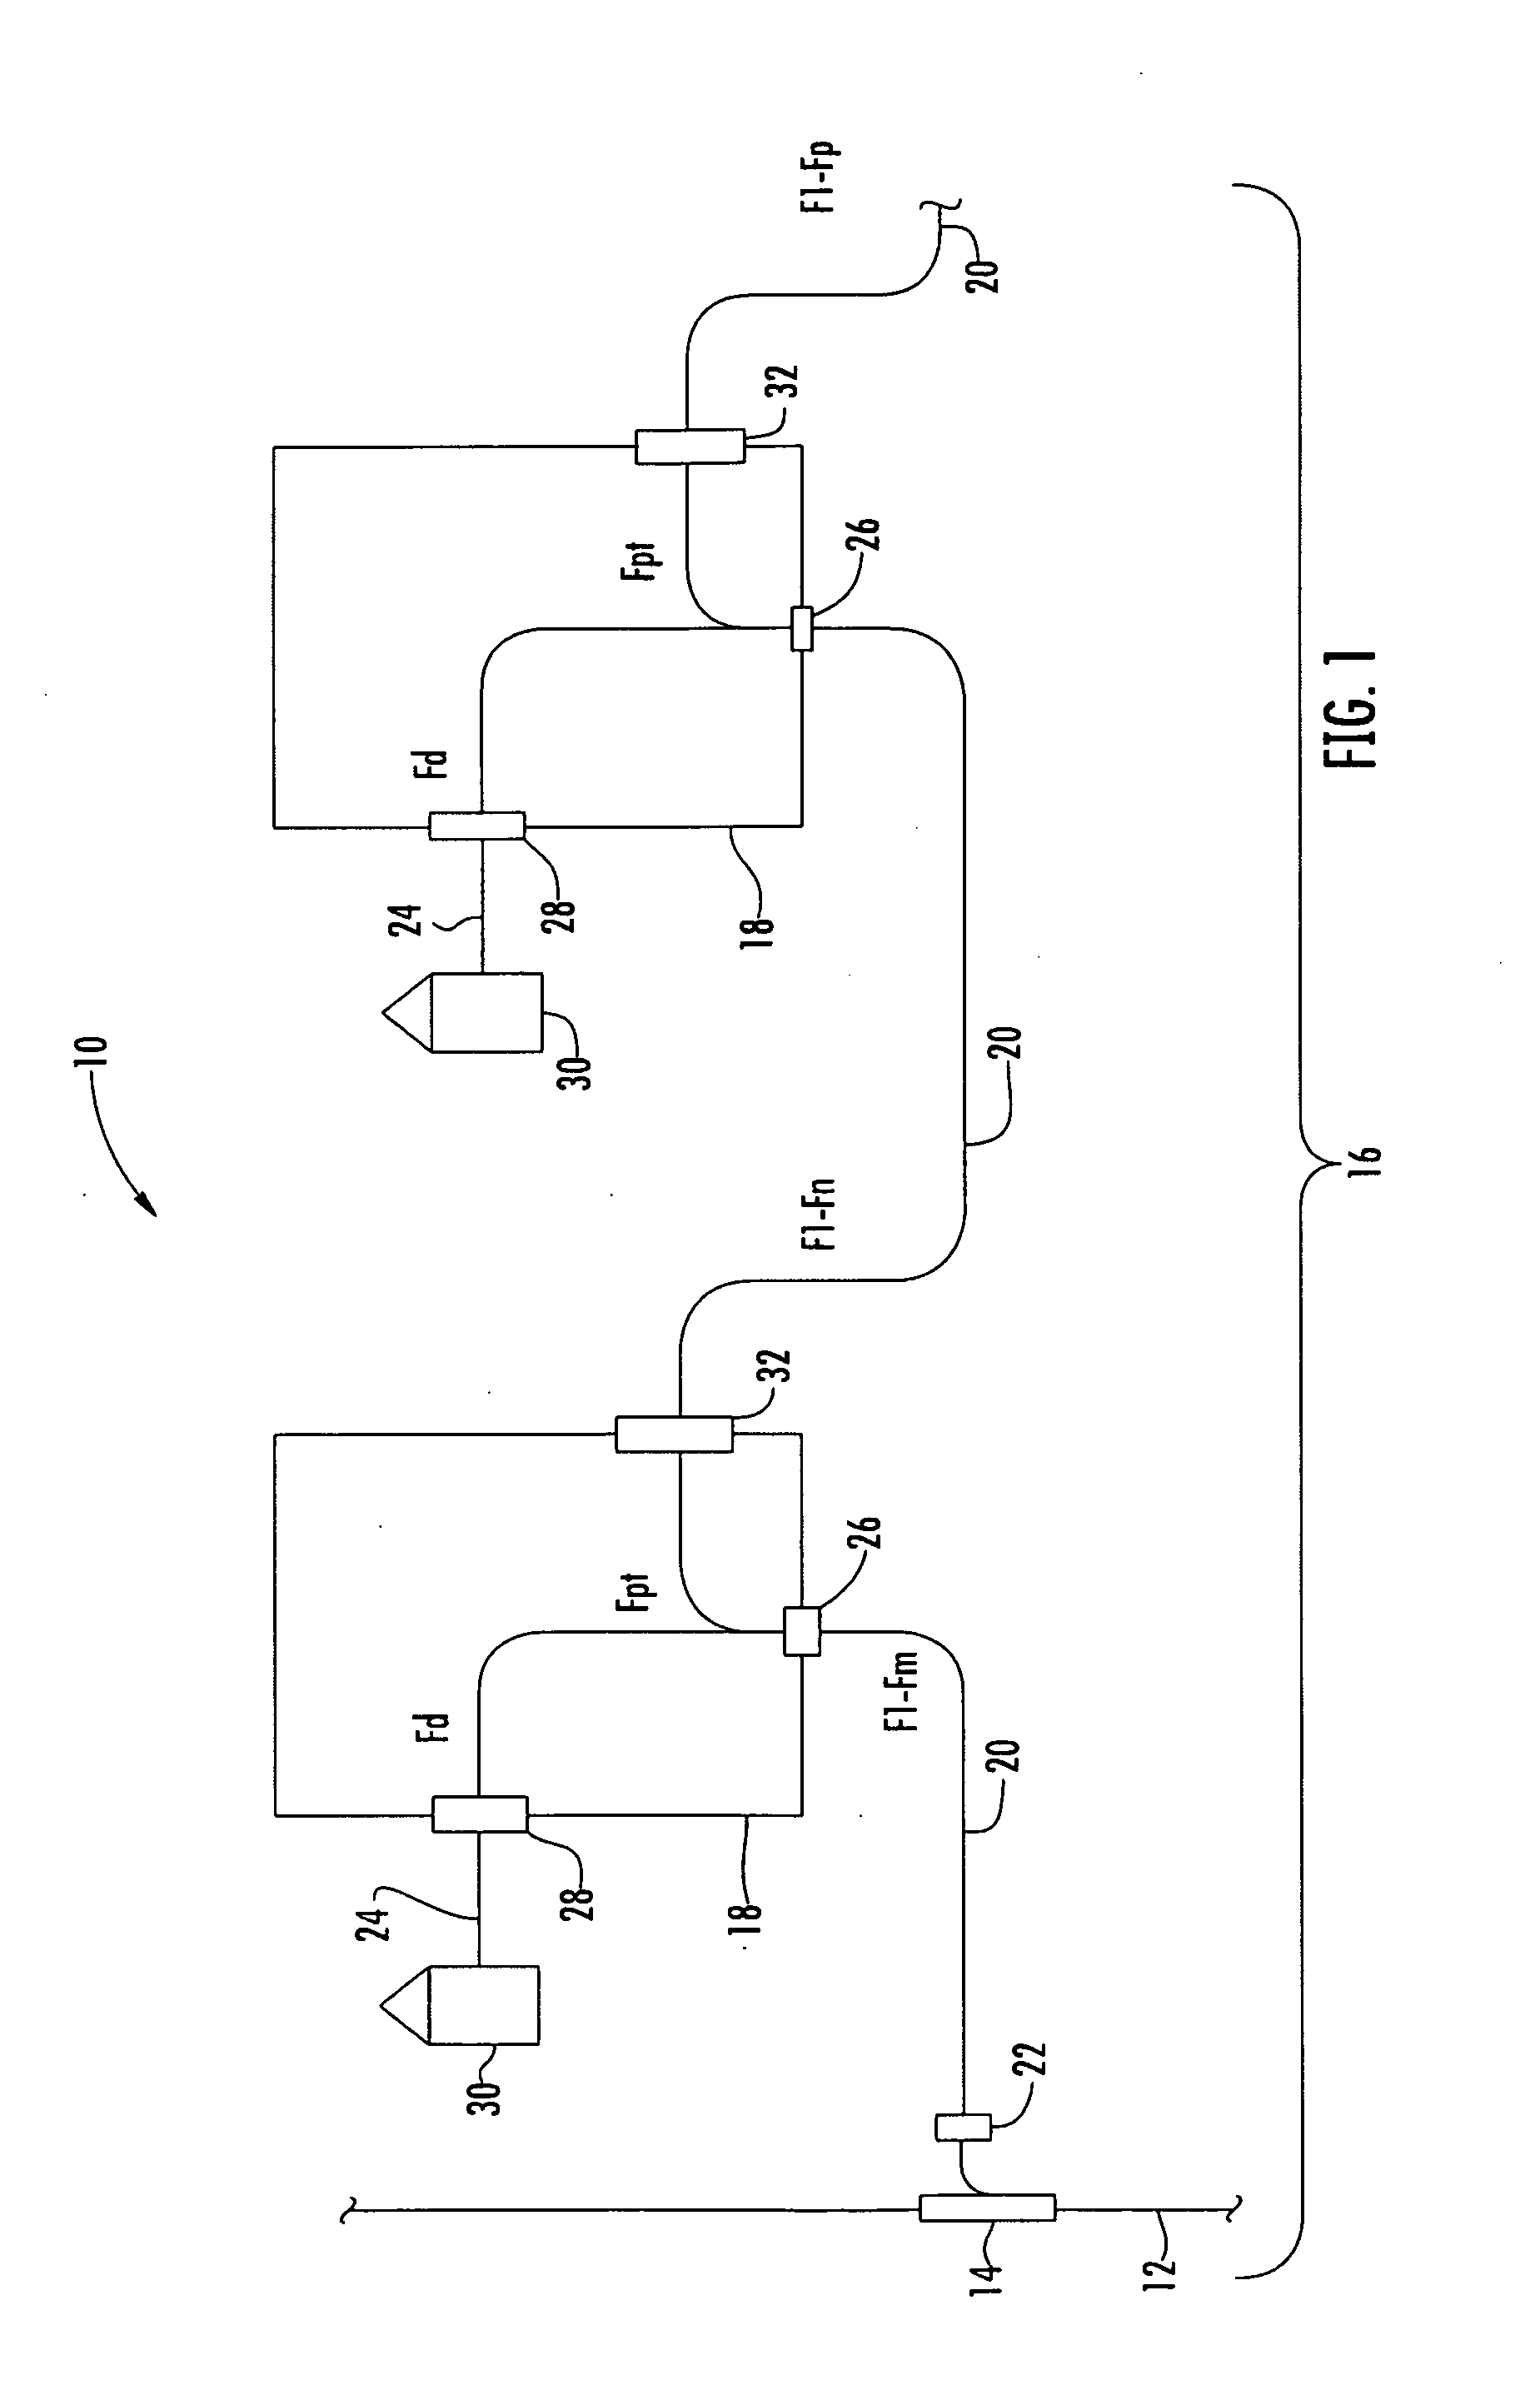 Optical Connection Terminal Having Port Mapping Scheme